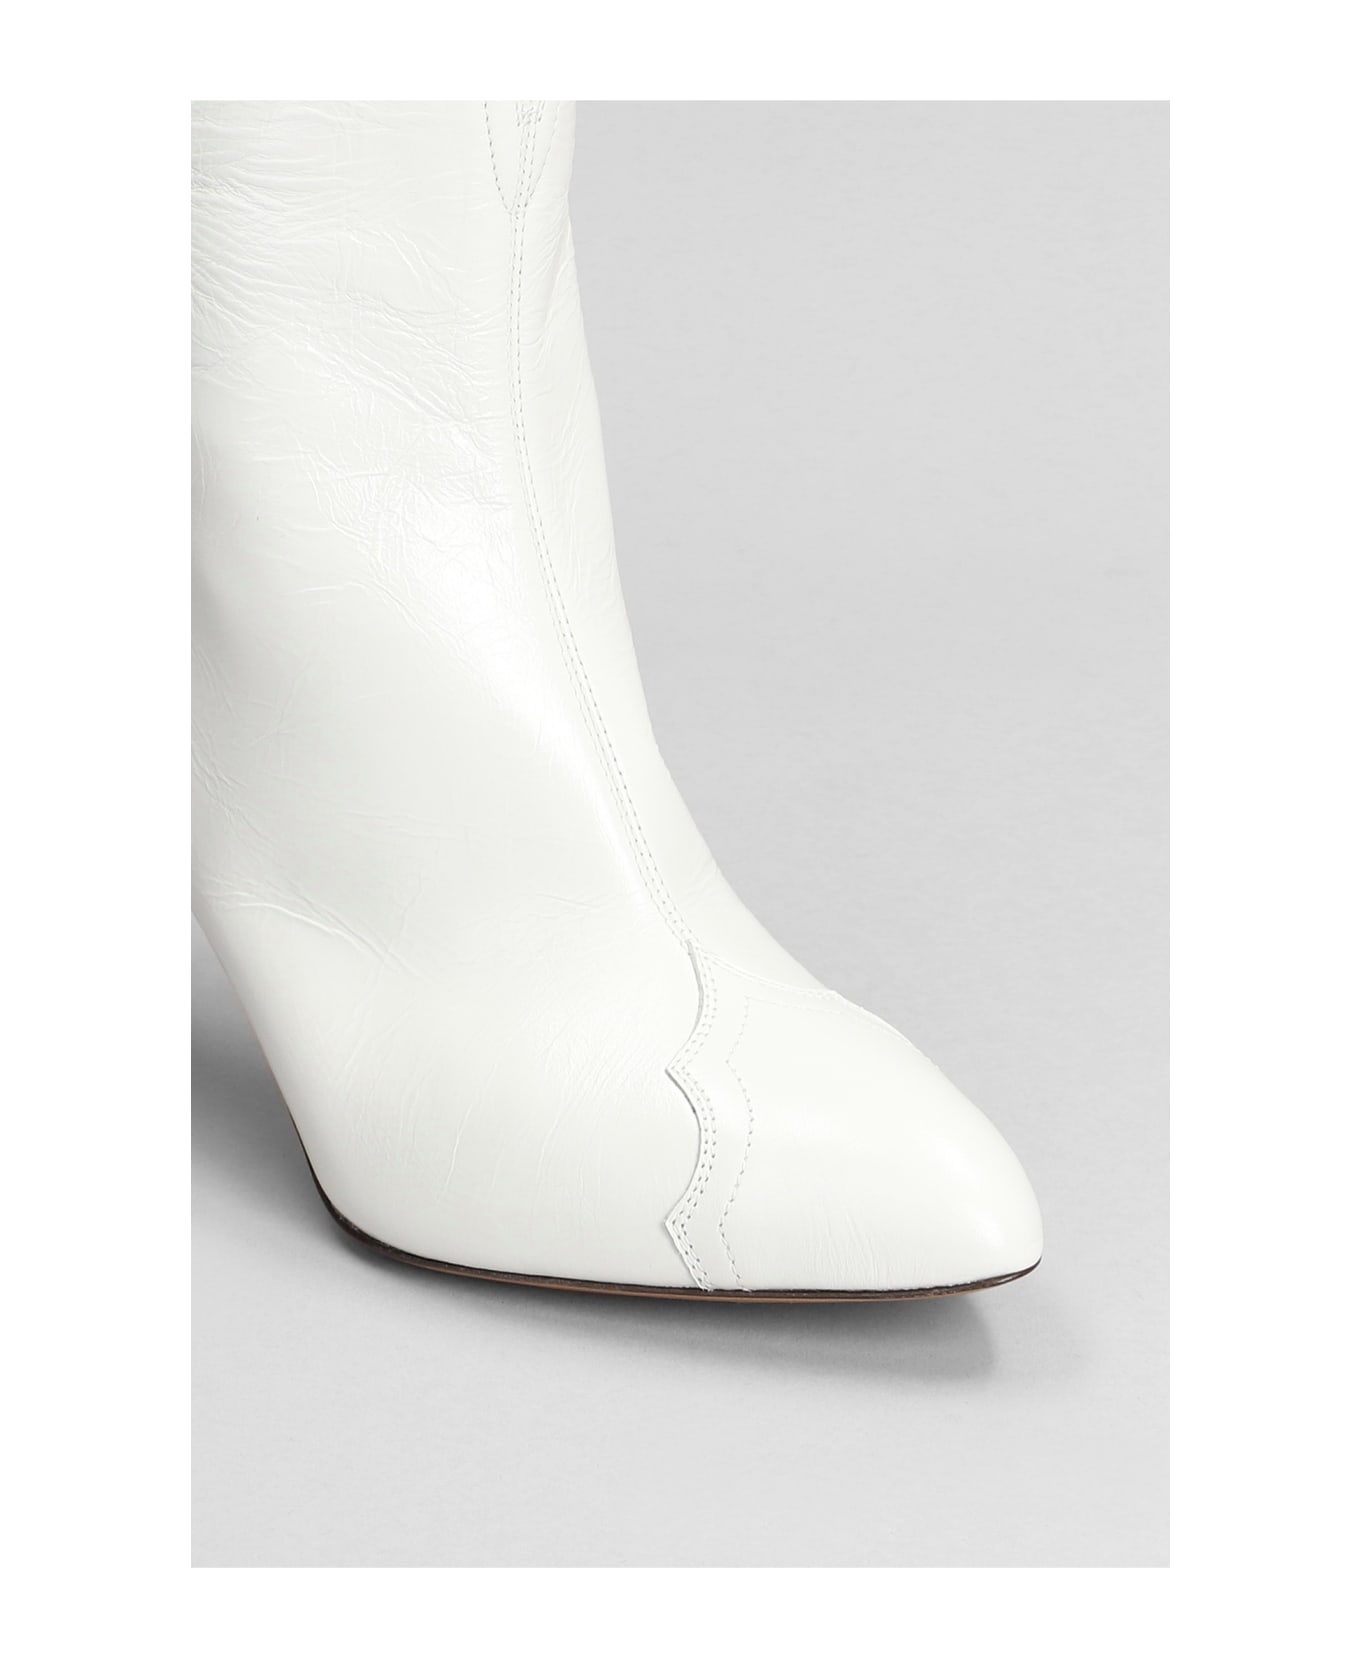 Isabel Marant Dytho High Heels Ankle Boots - WHITE